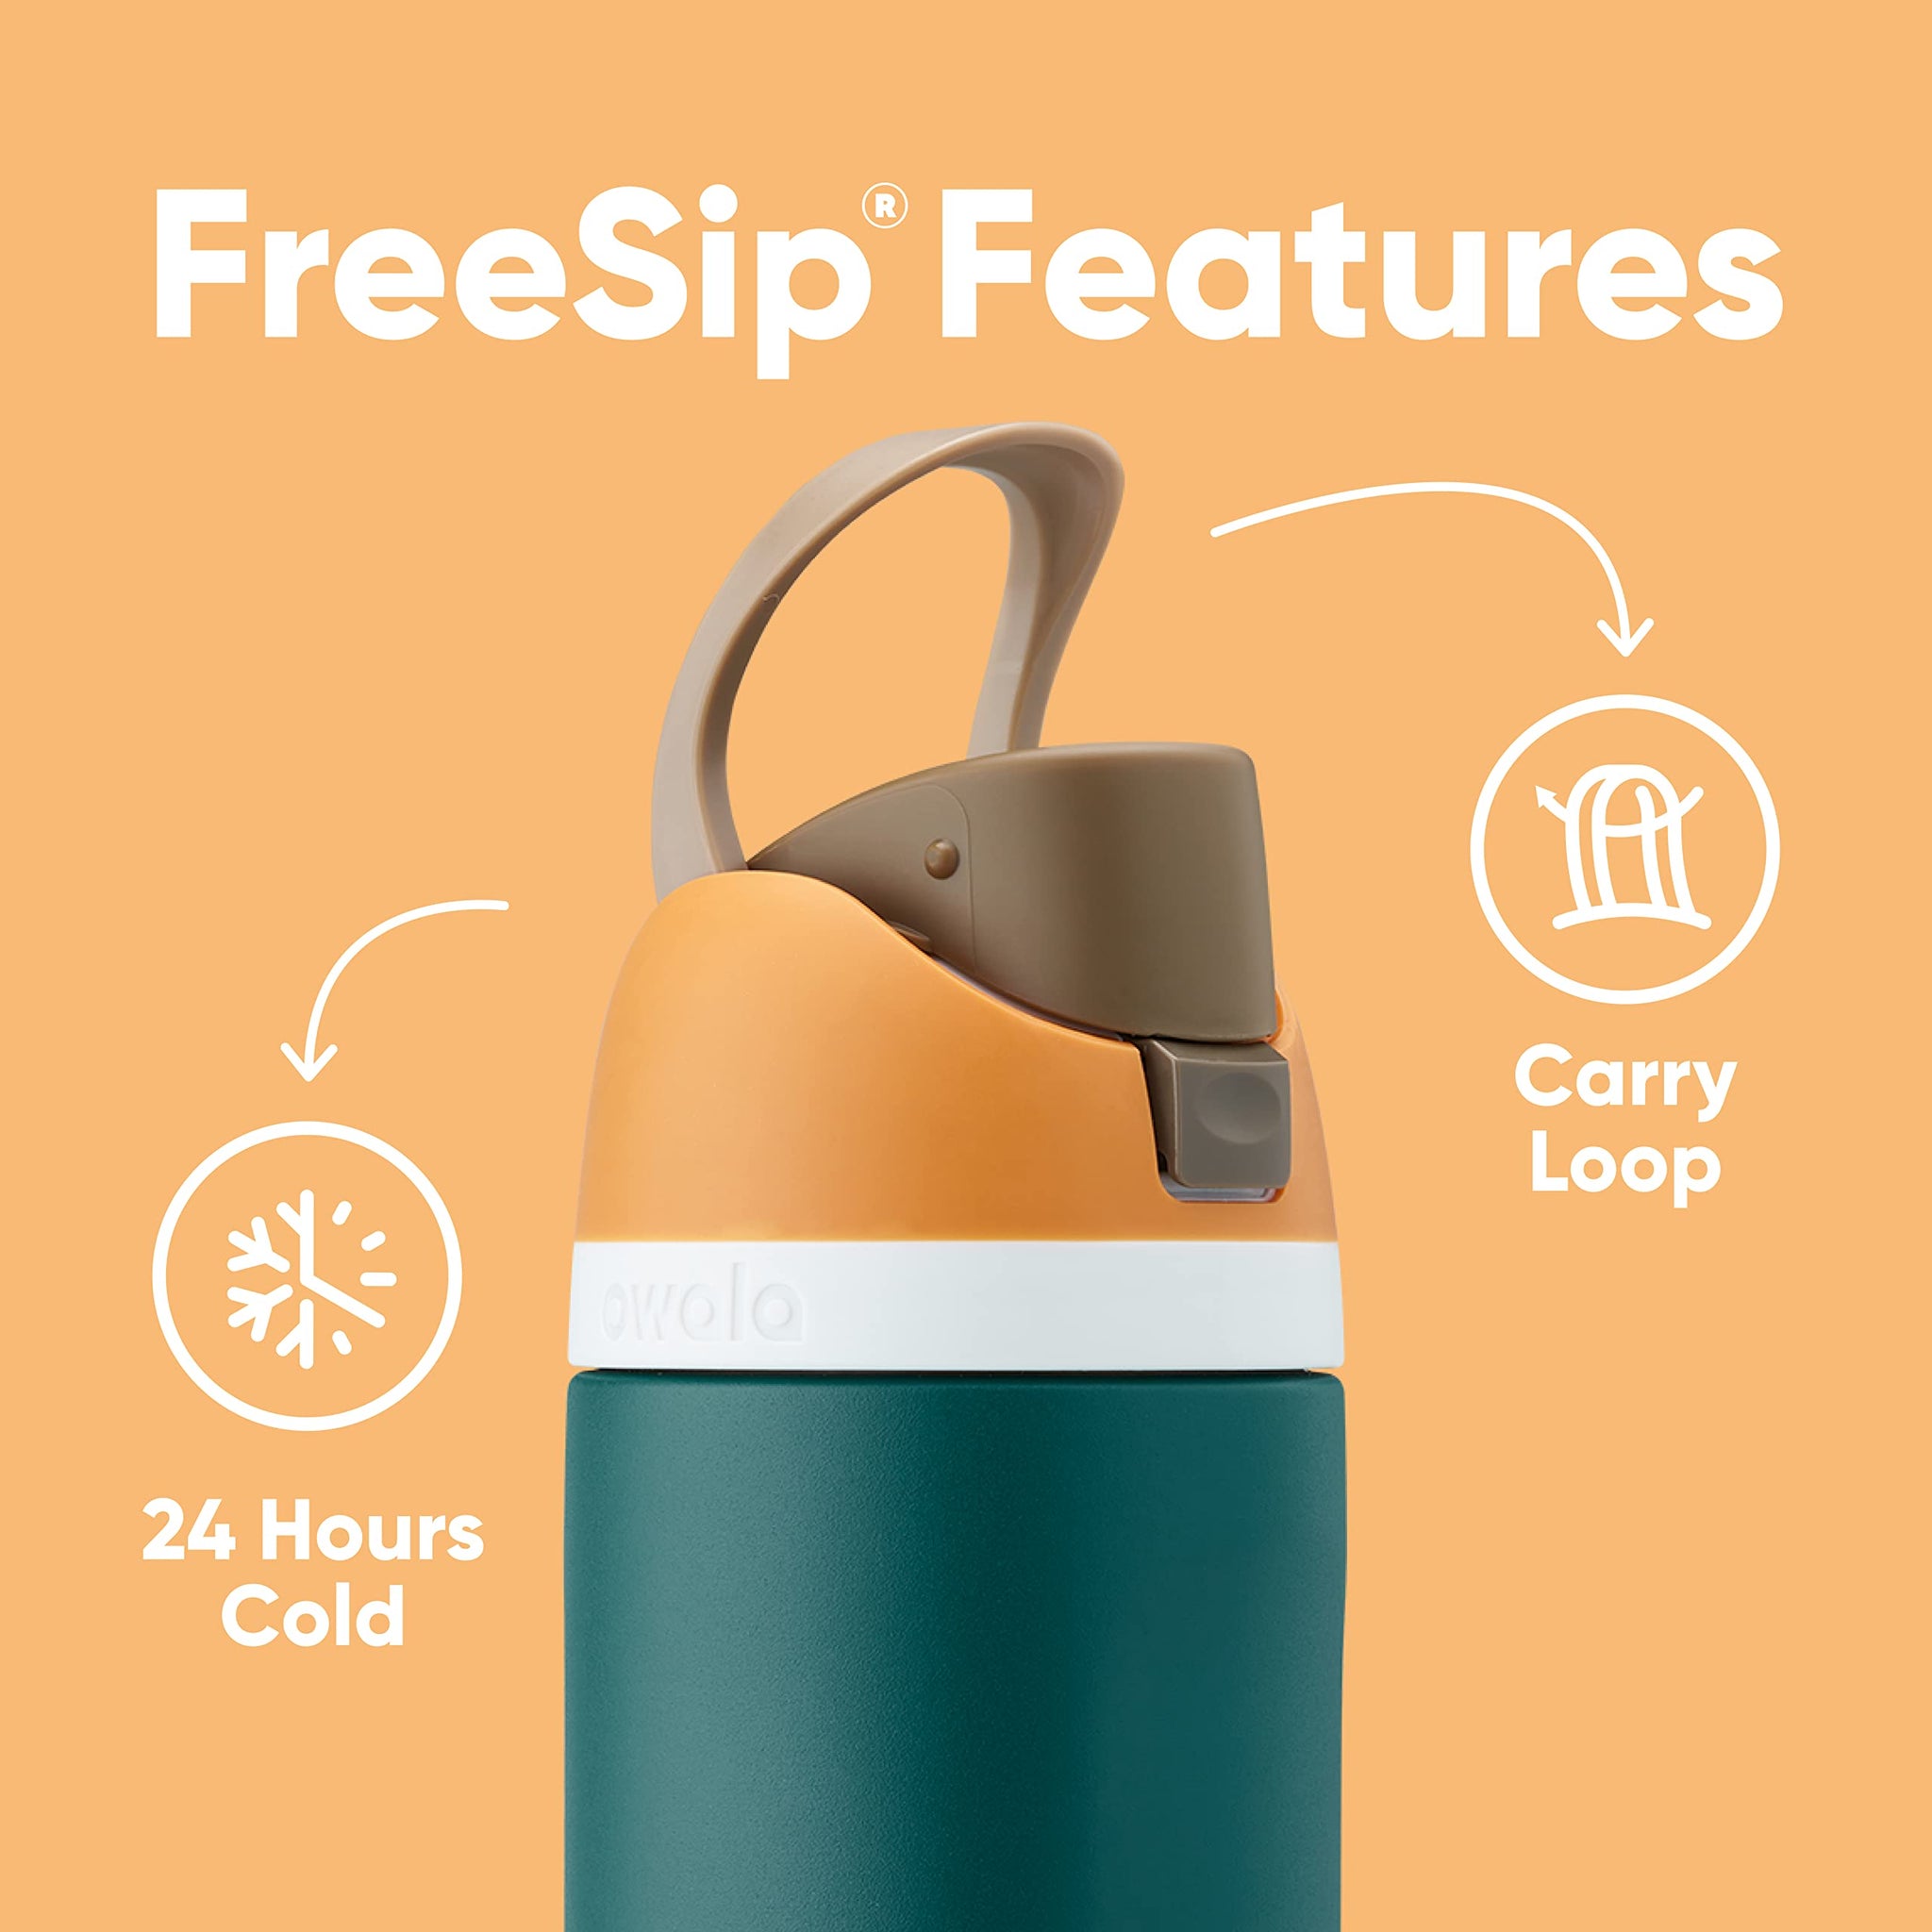 Owala FreeSip 24 oz. Vacuum Insulated Stainless Steel Water Bottle 